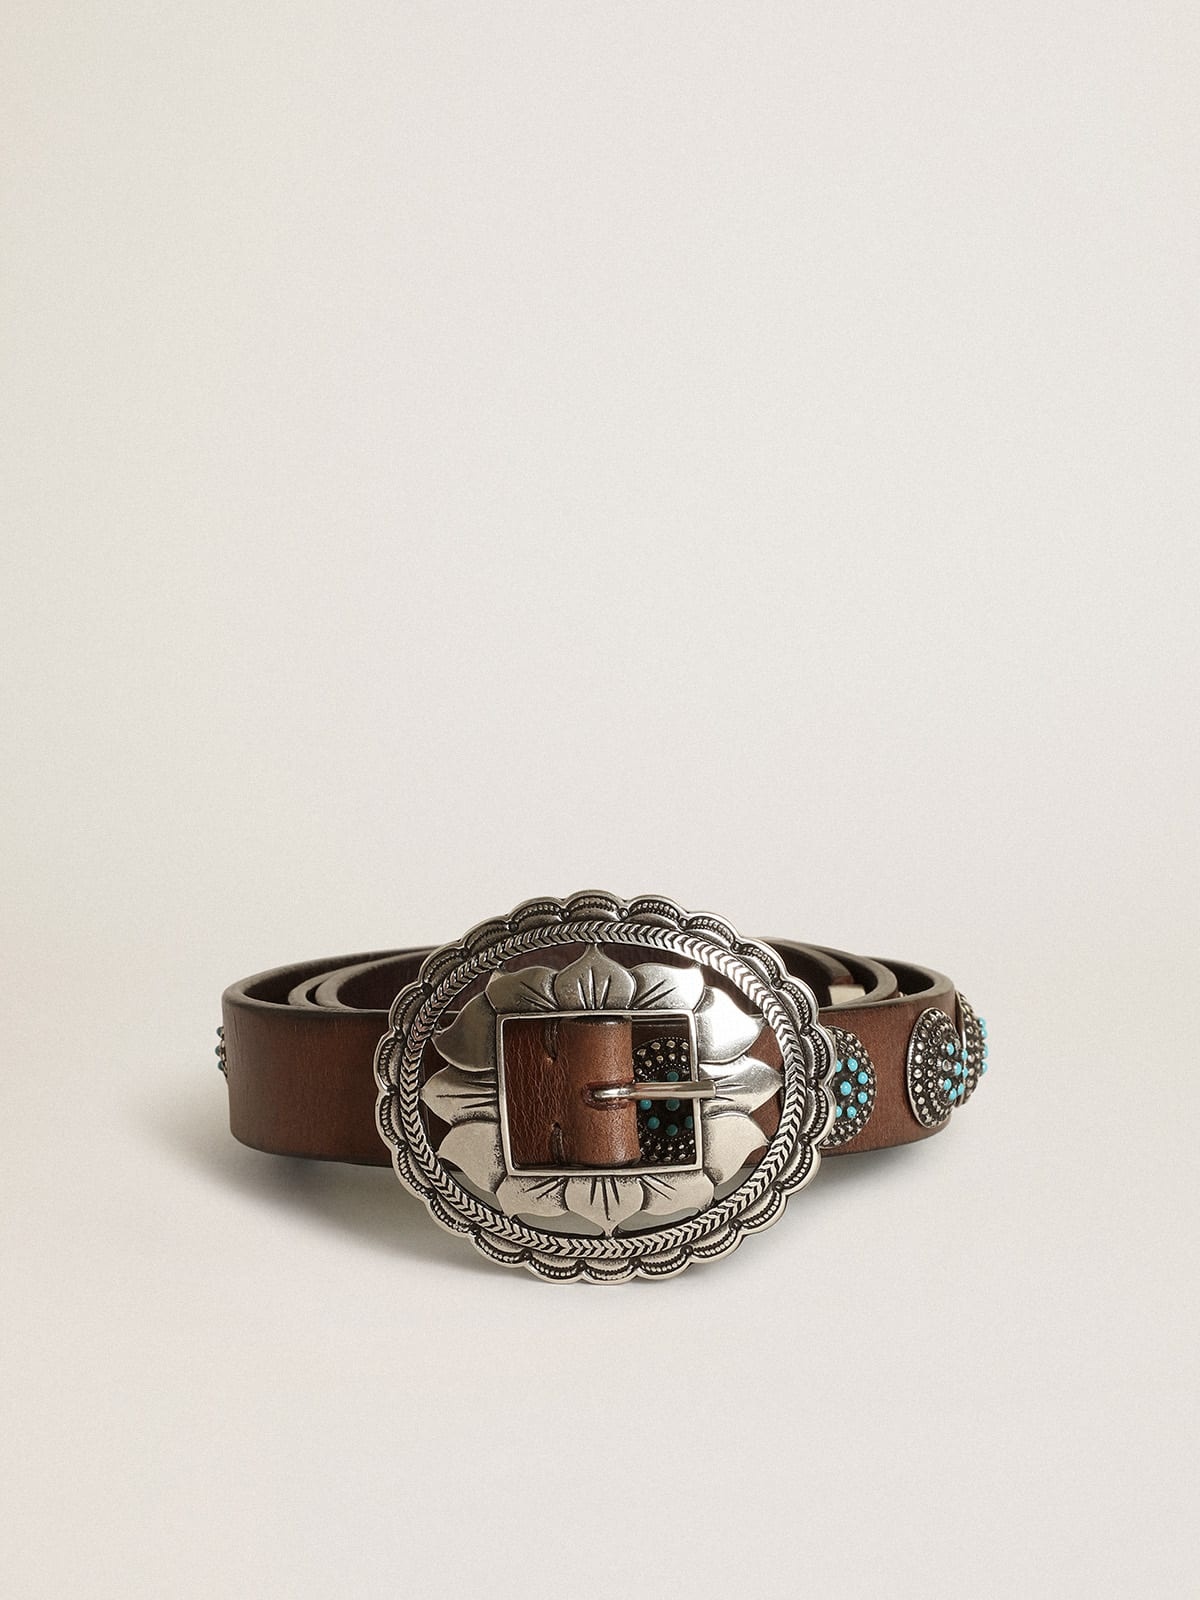 Women's belt in dark brown leather with silver studs - 1